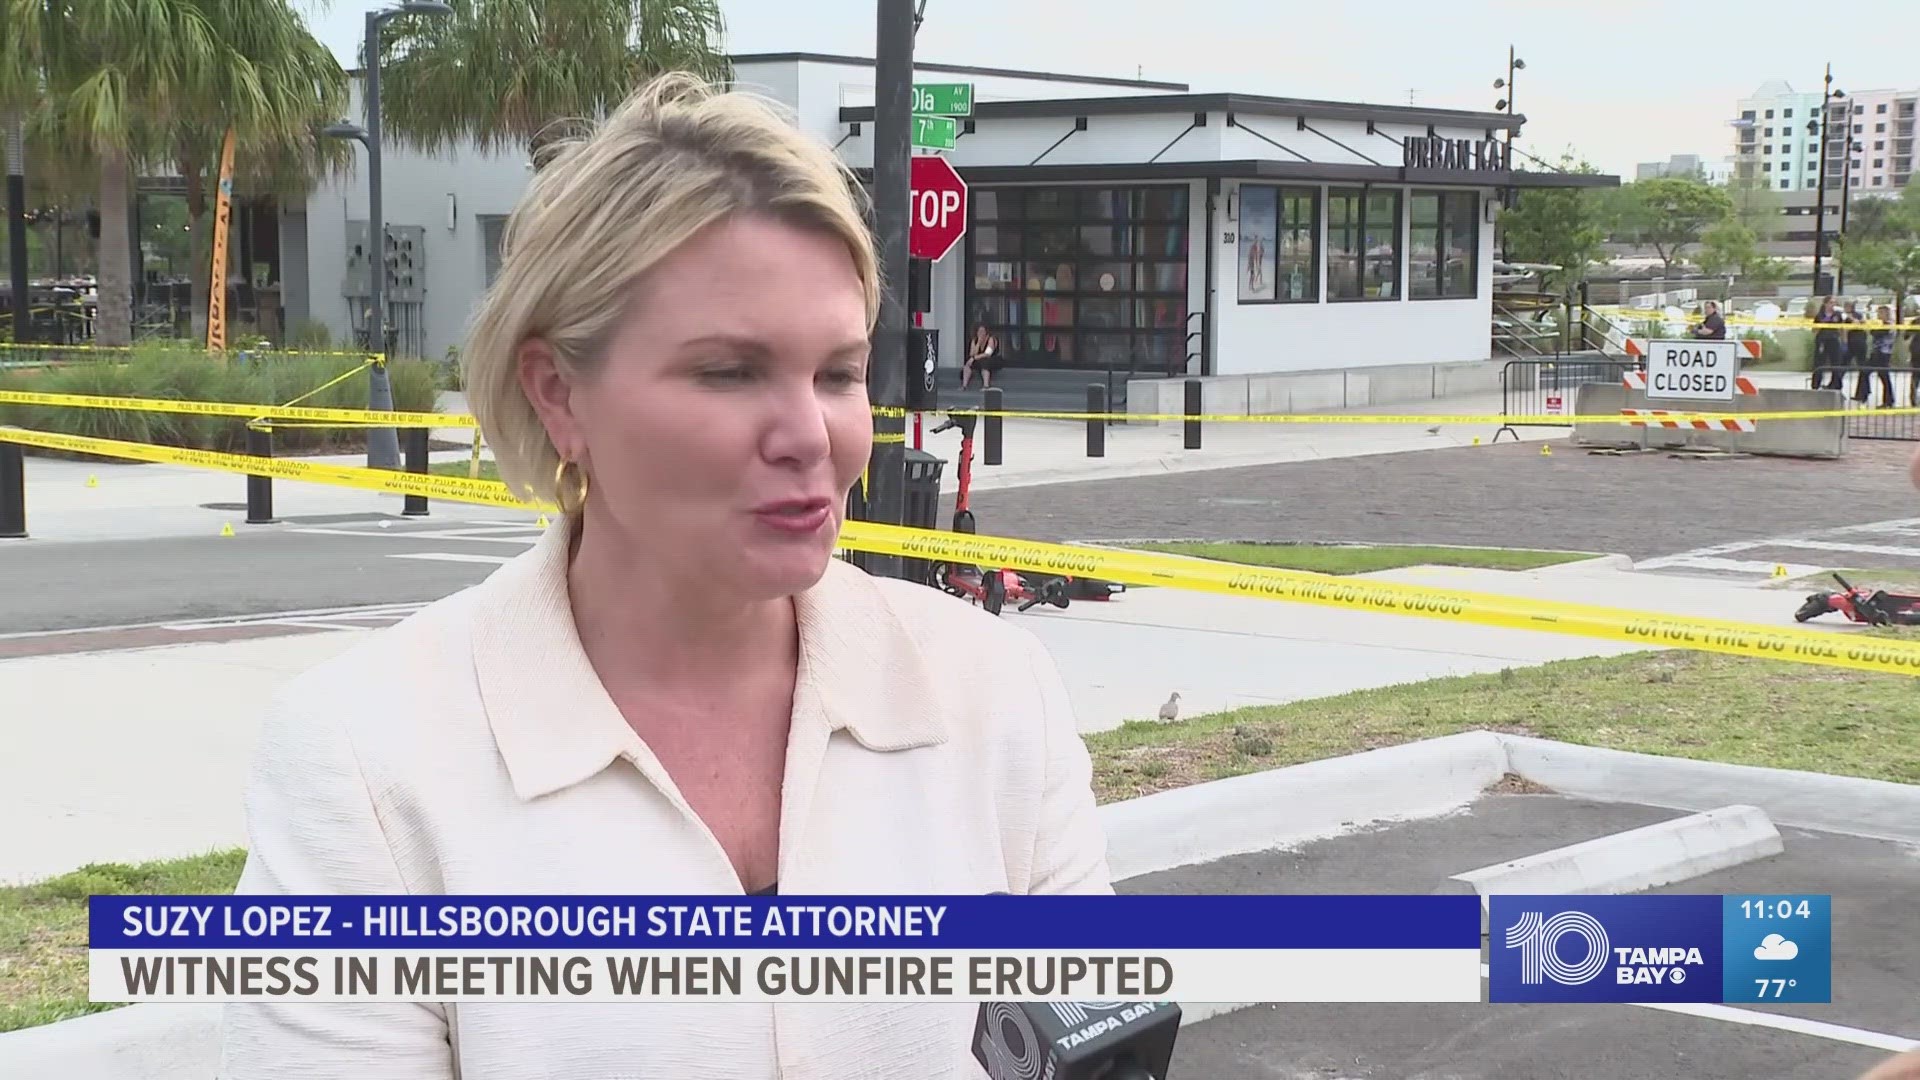 Three people shot were innocent bystanders, according to Tampa Police Chief Lee Bercaw.